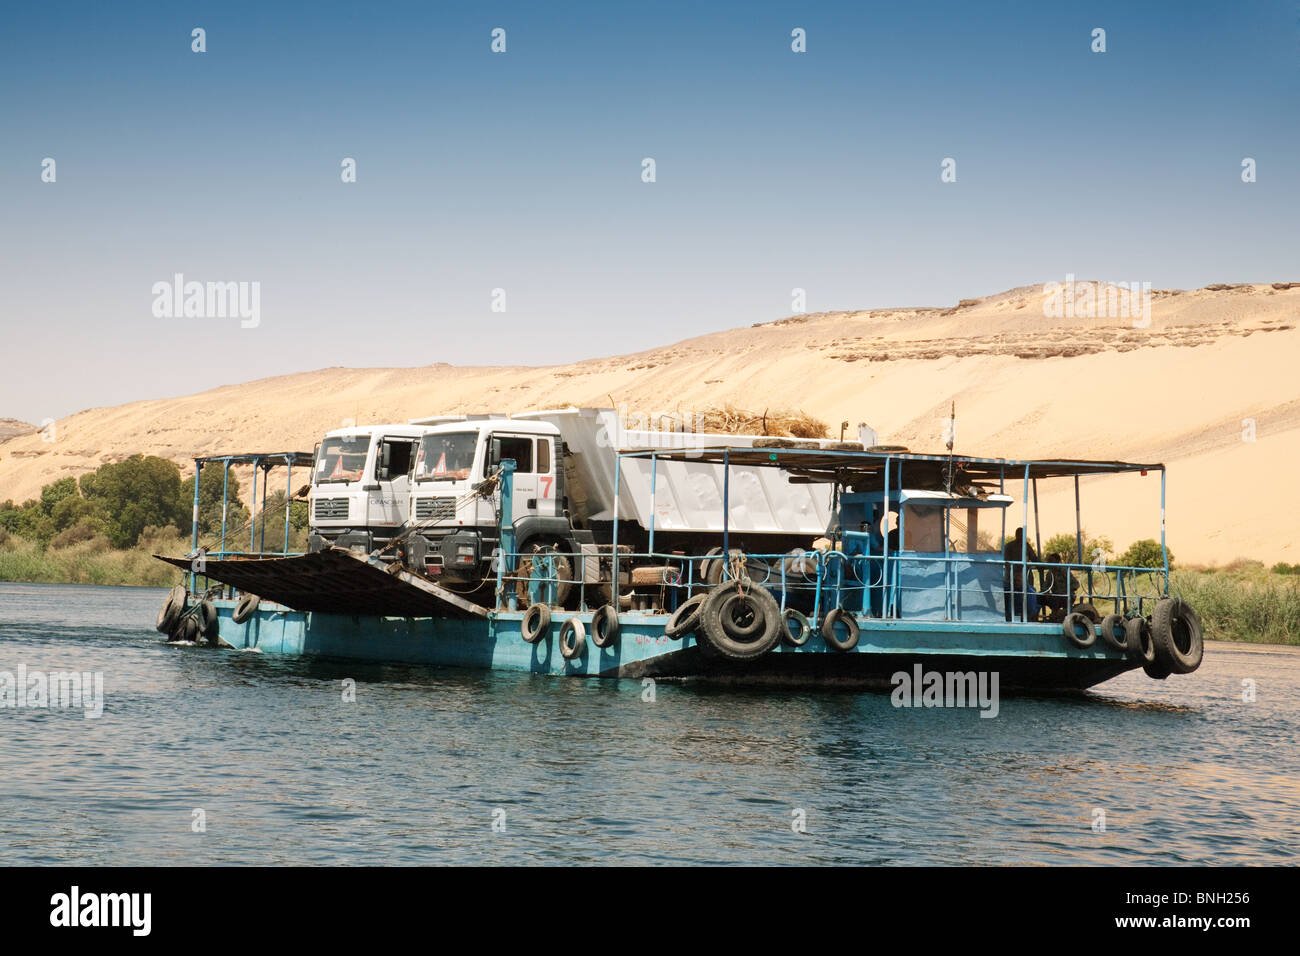 A ferry carrying lorries on the River Nile at Aswan, Upper Egypt Africa Stock Photo